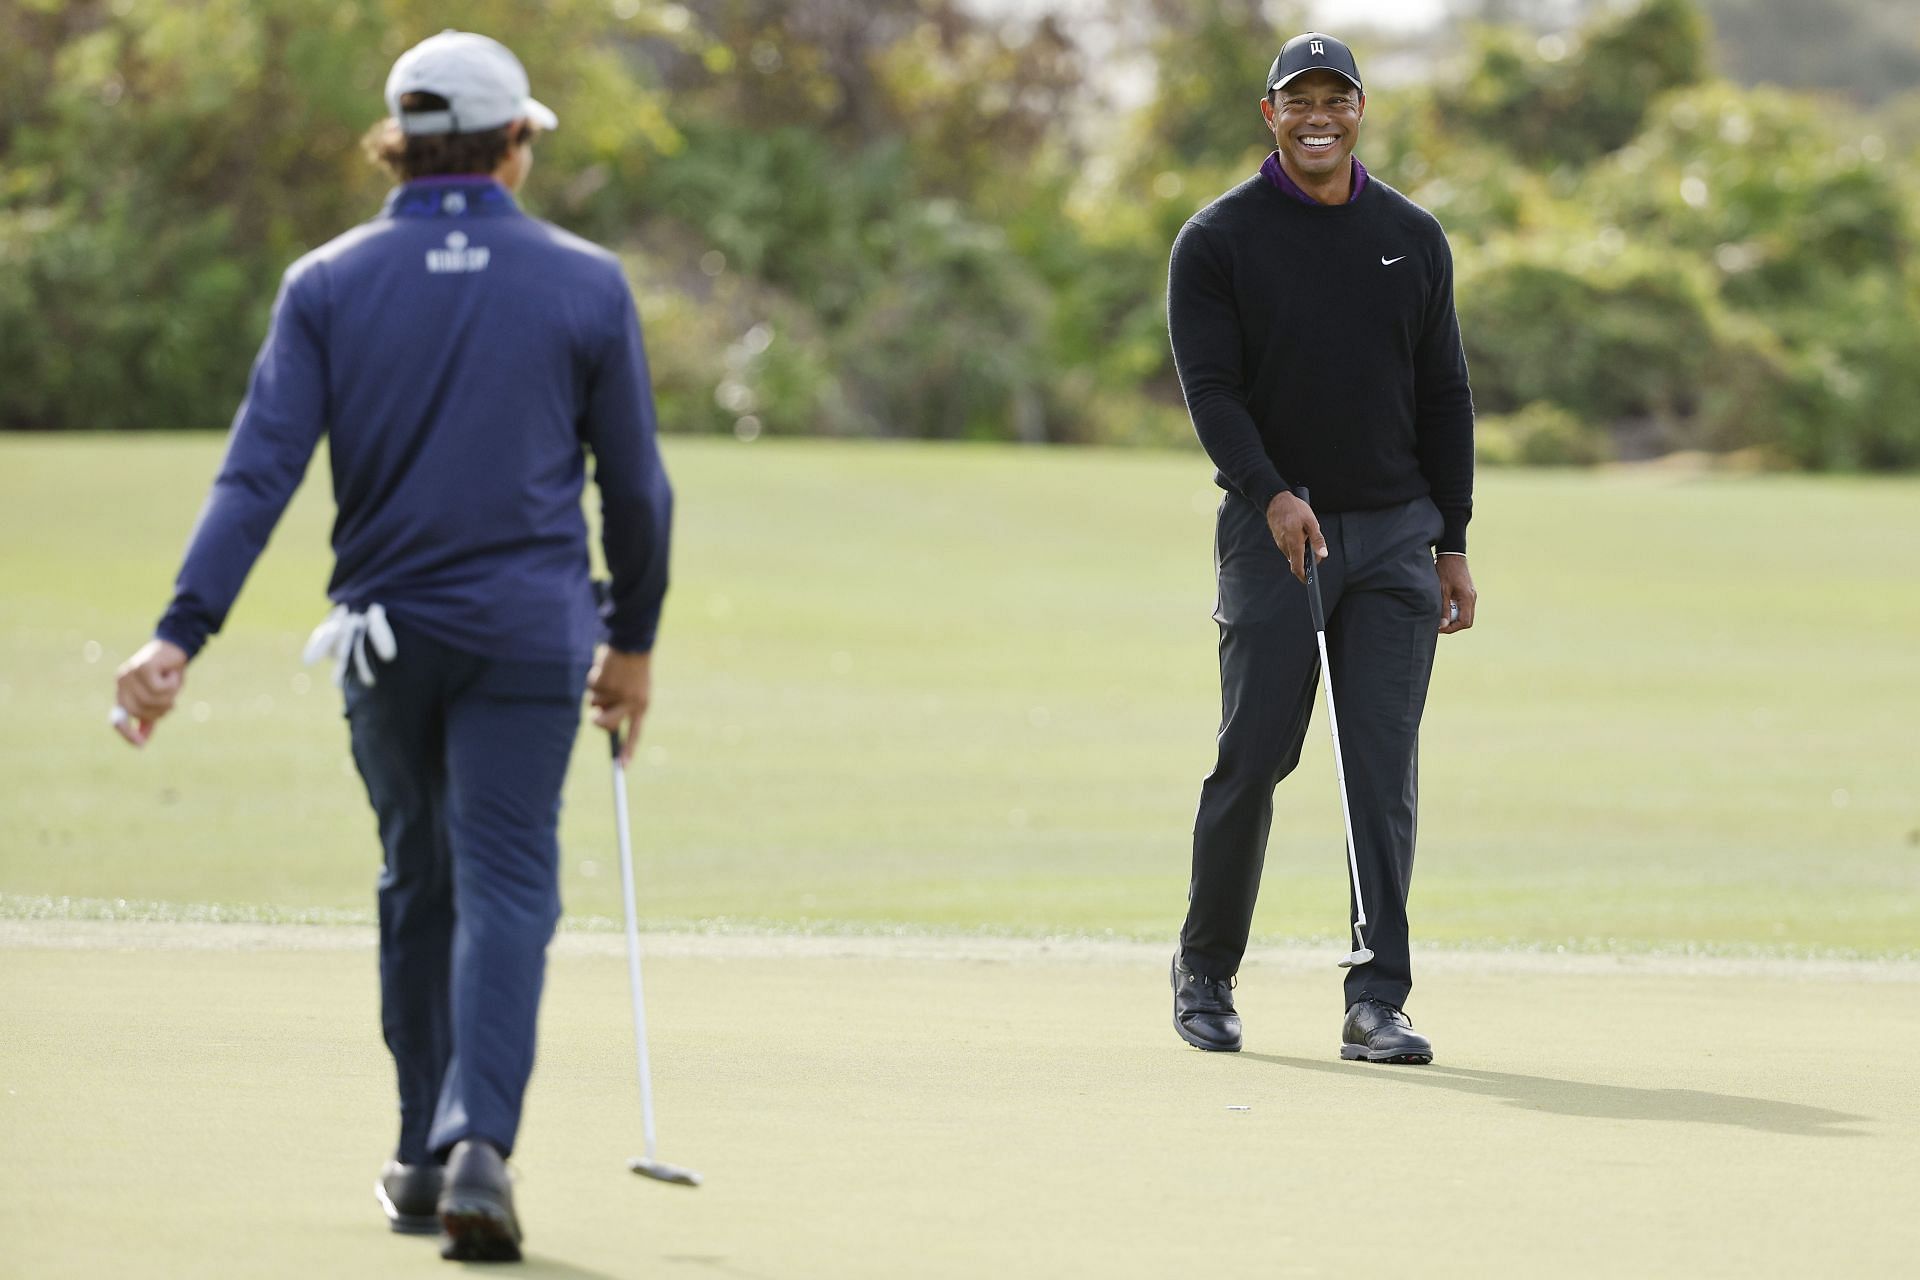 Tiger Woods announces split with Nike, leaving brand's ties to